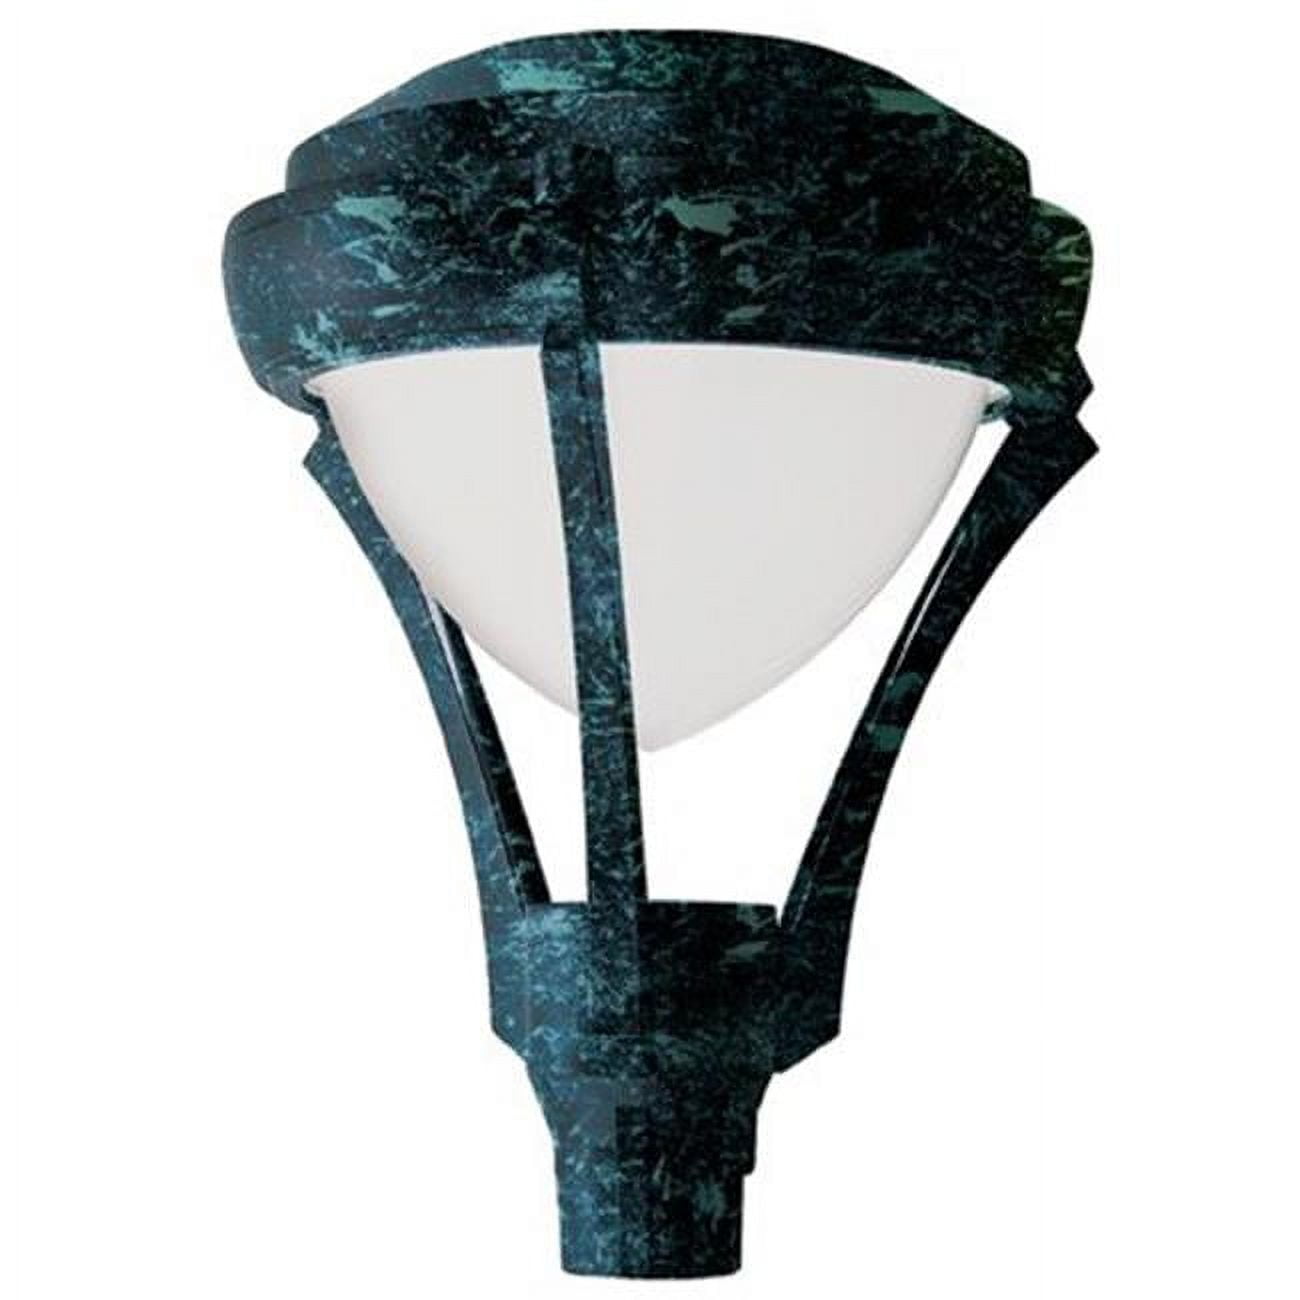 Picture of Dabmar Lighting GM596-VG 50W 120V Powder Coated Cast Aluminum Post Top Light Fixture with Metal Halide Lamp, Verde Green - 27.95 x 21.65 x 21.65 in.